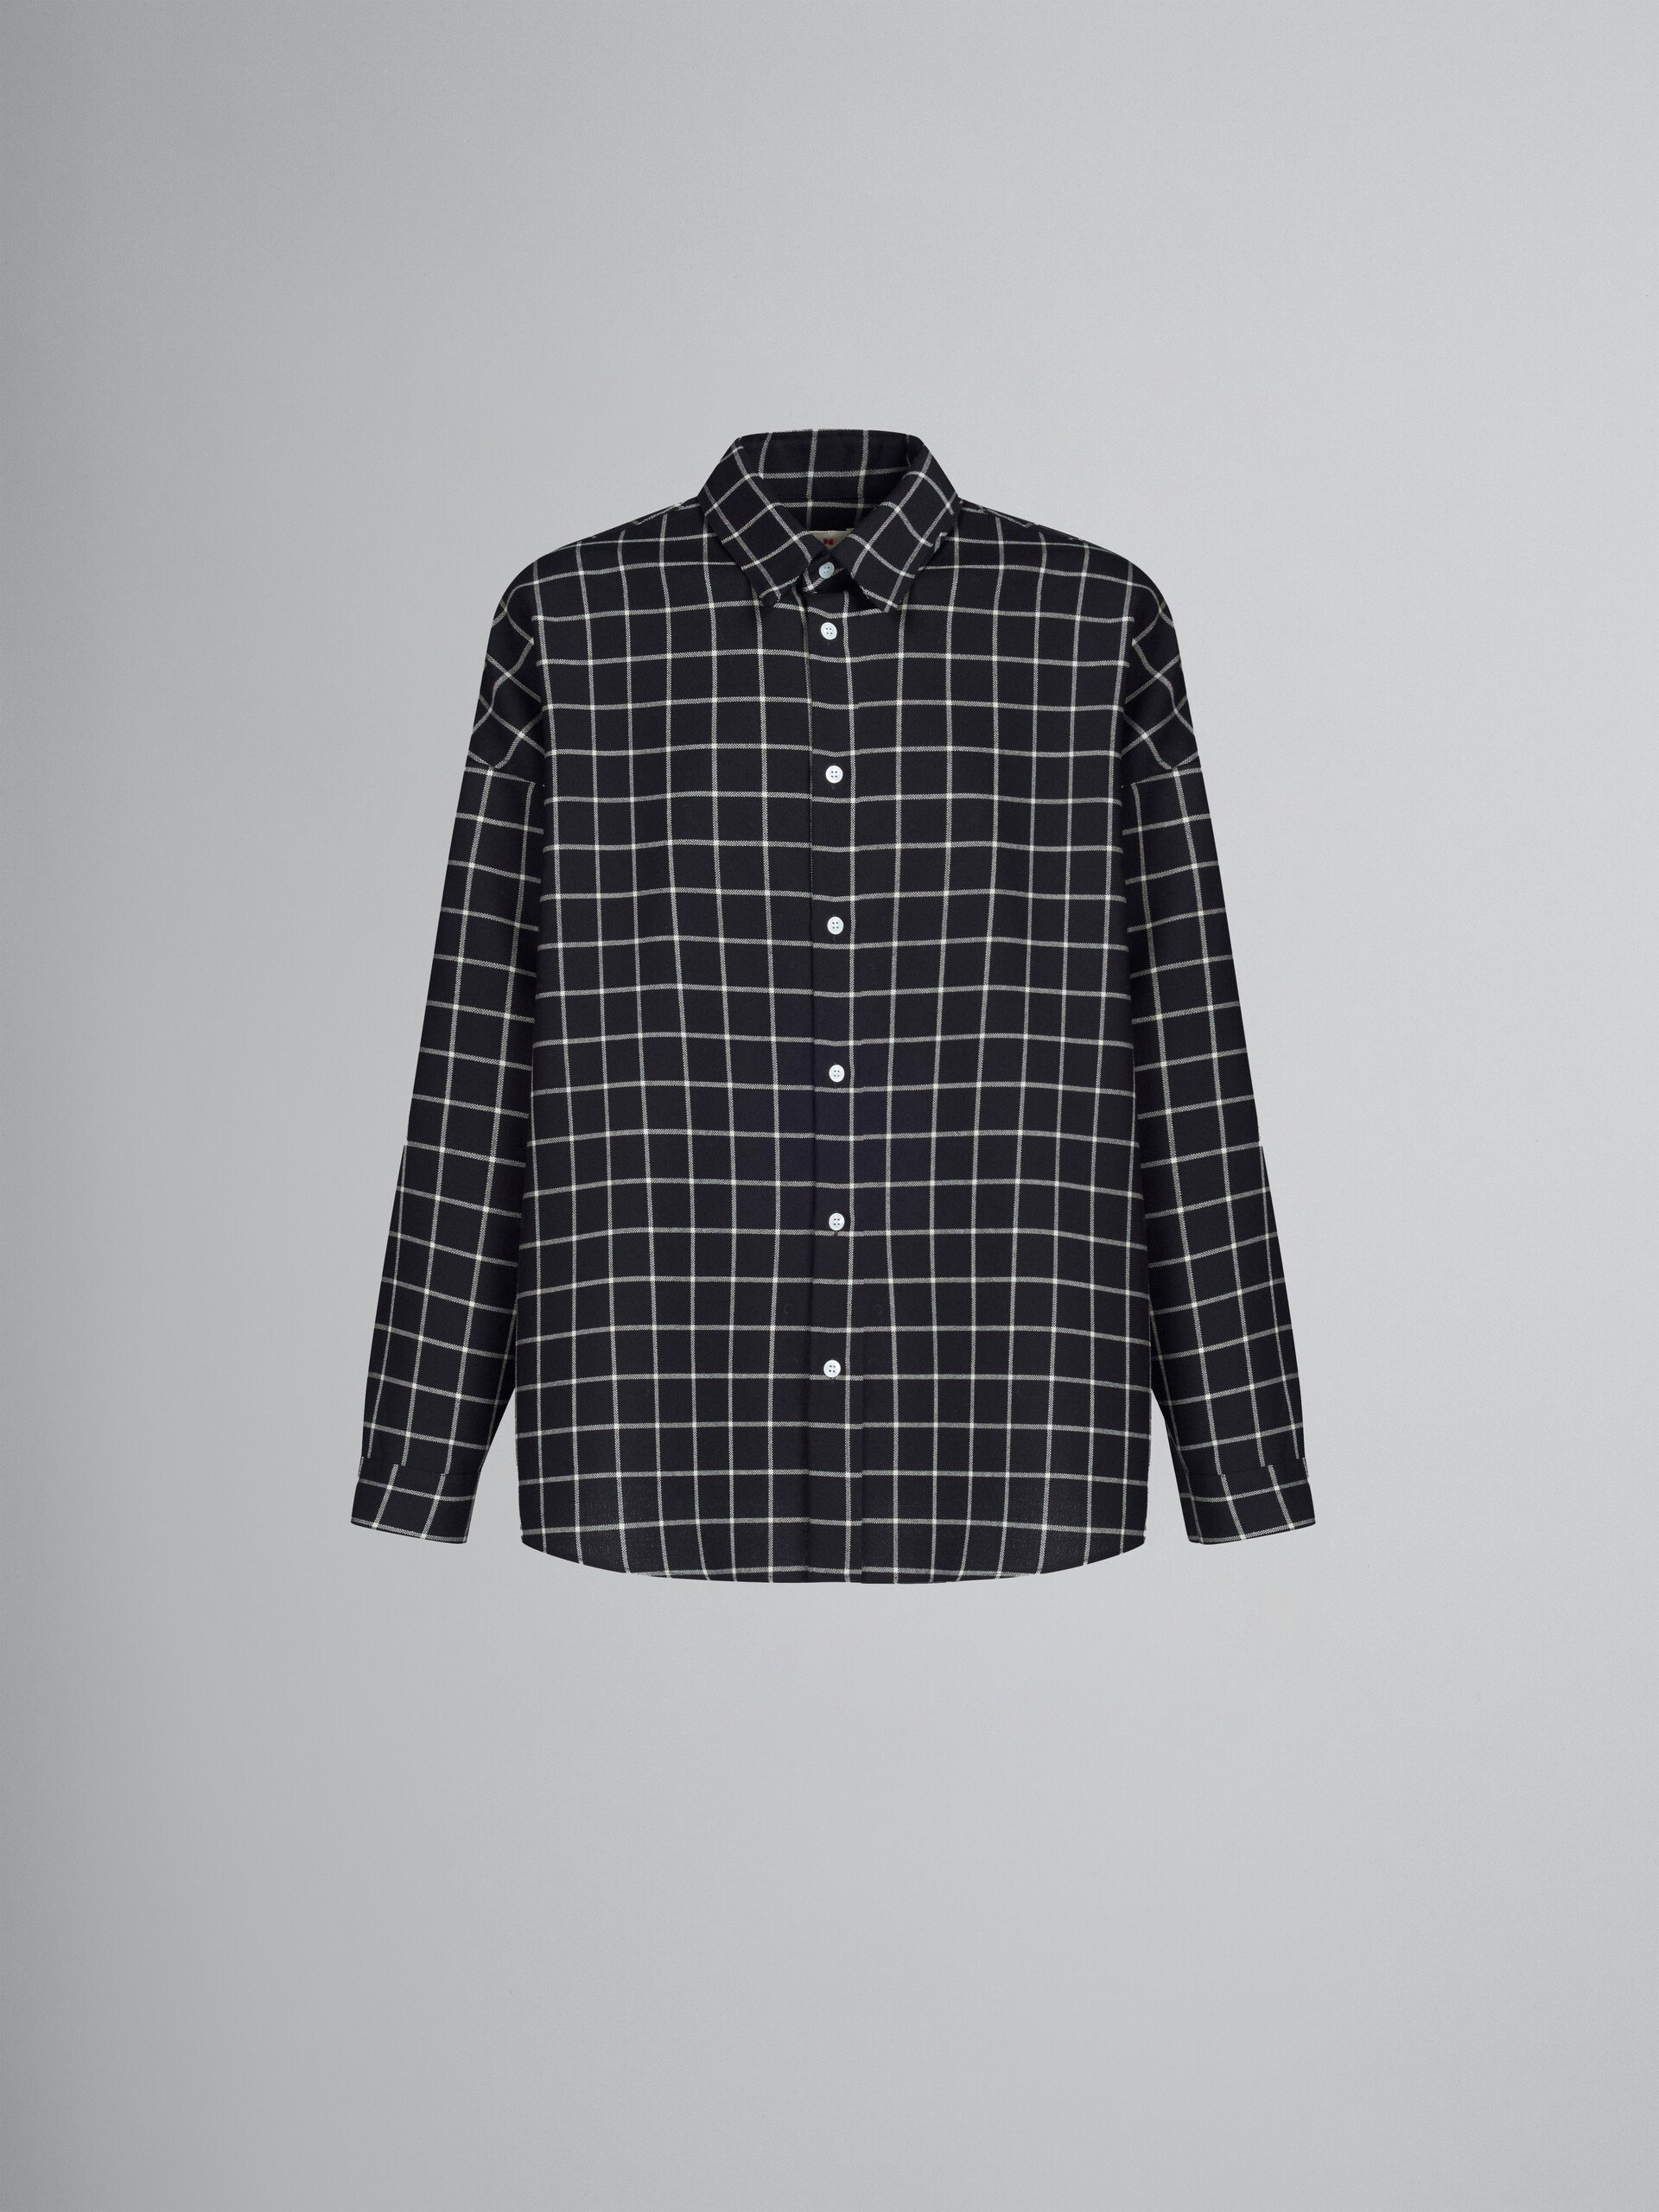 Black wool long-sleeved shirt with checked pattern - Shirts - Image 1